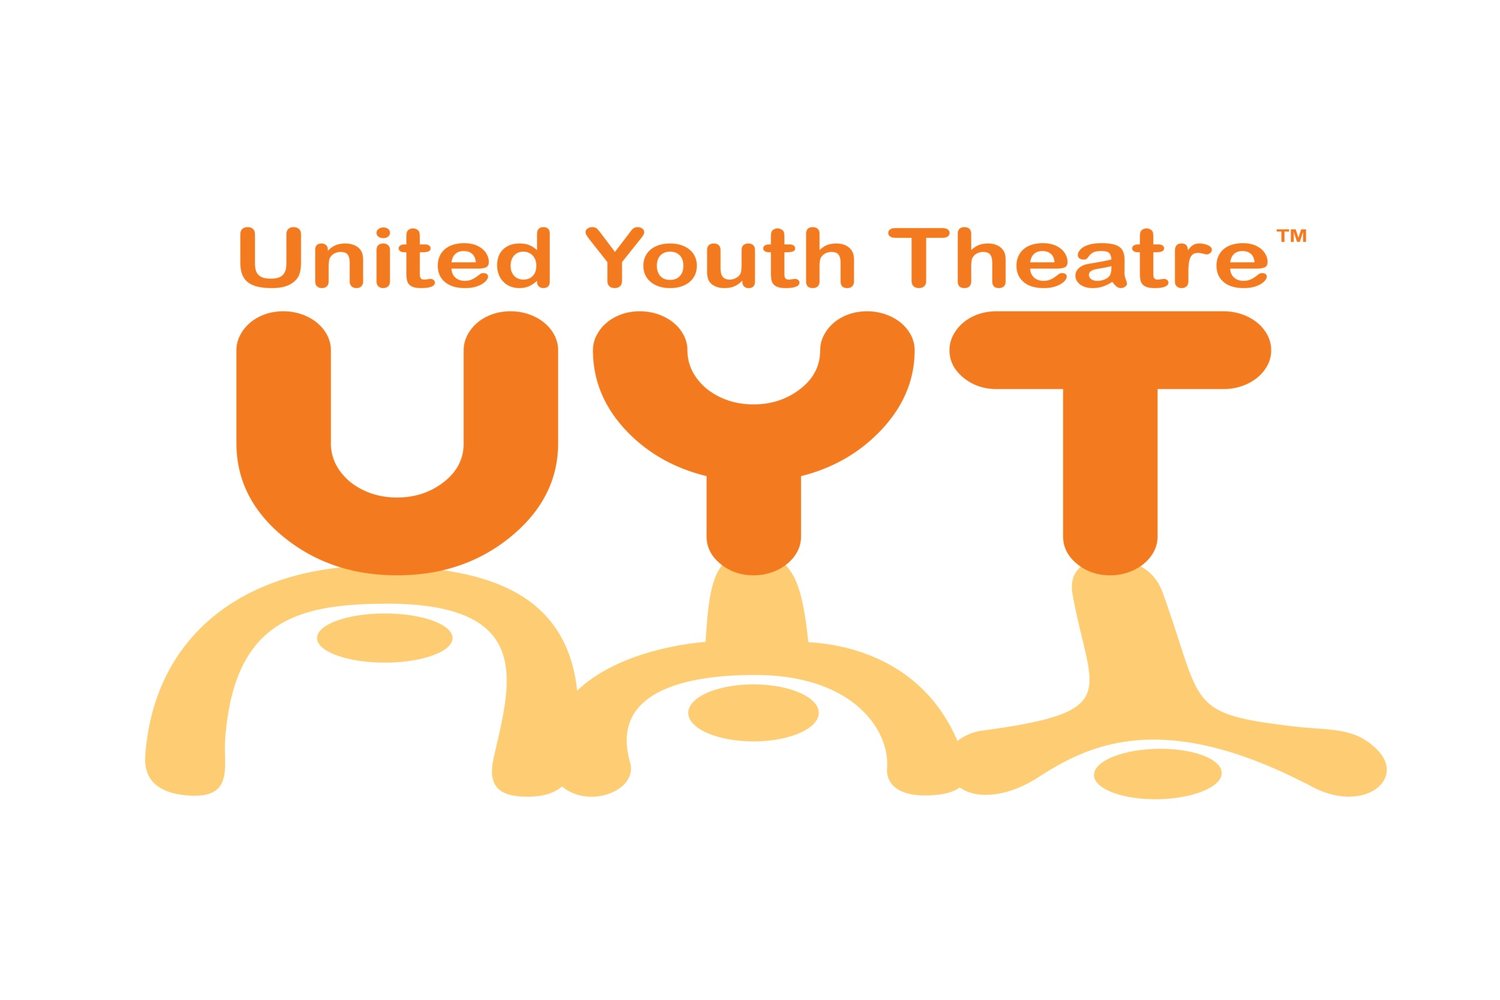 United Youth Theatre